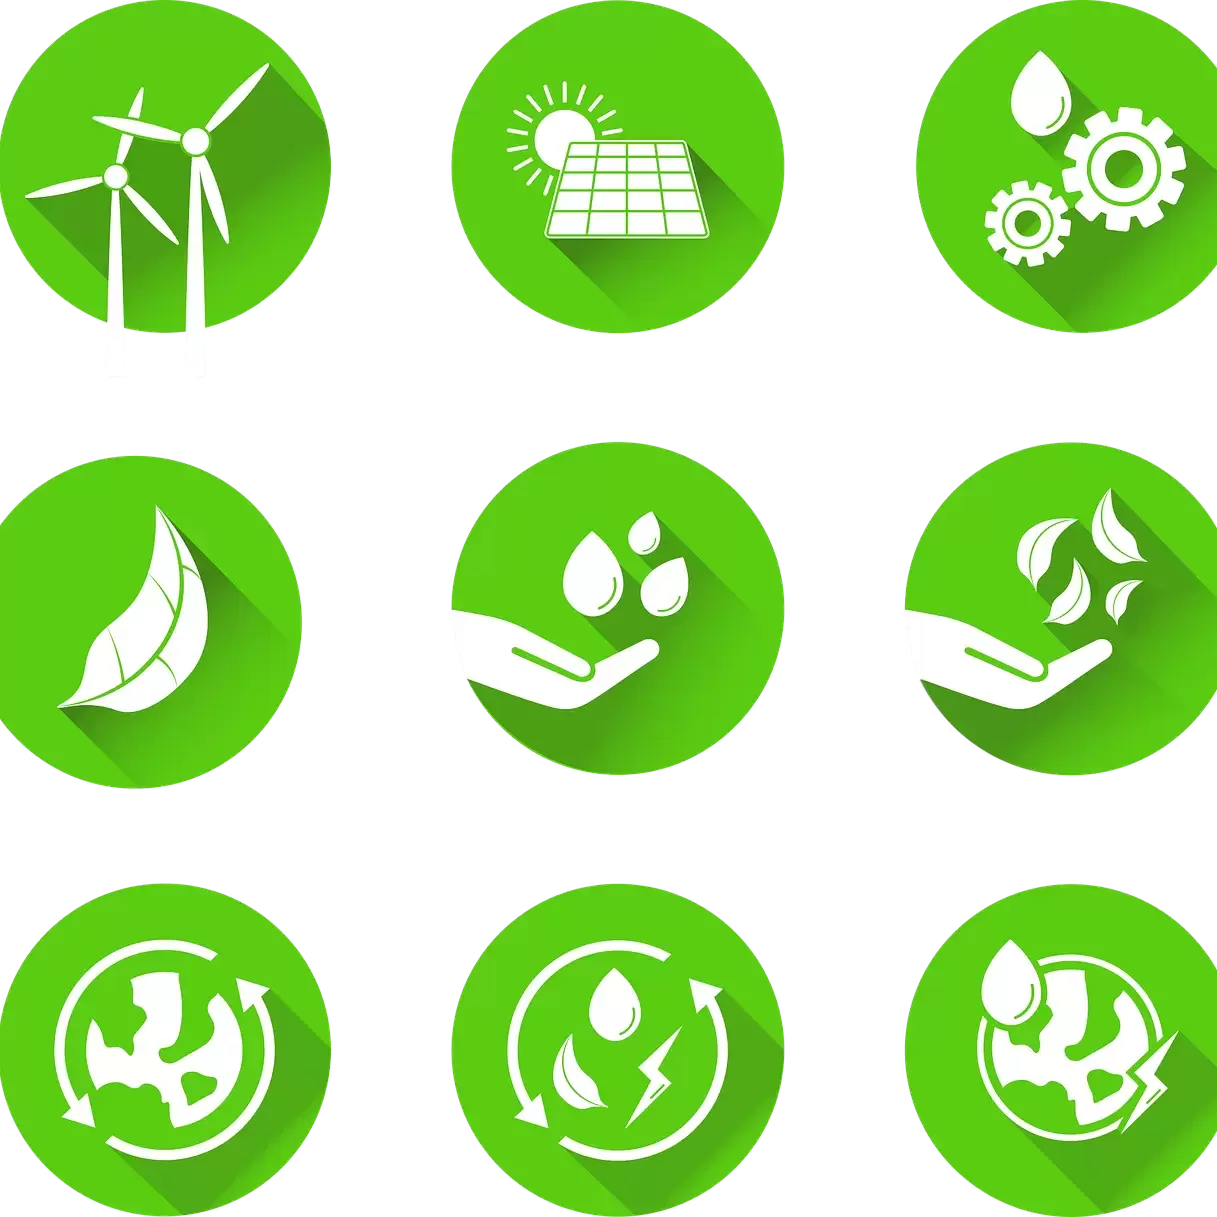 Nine green energy ideals to make this world a better place